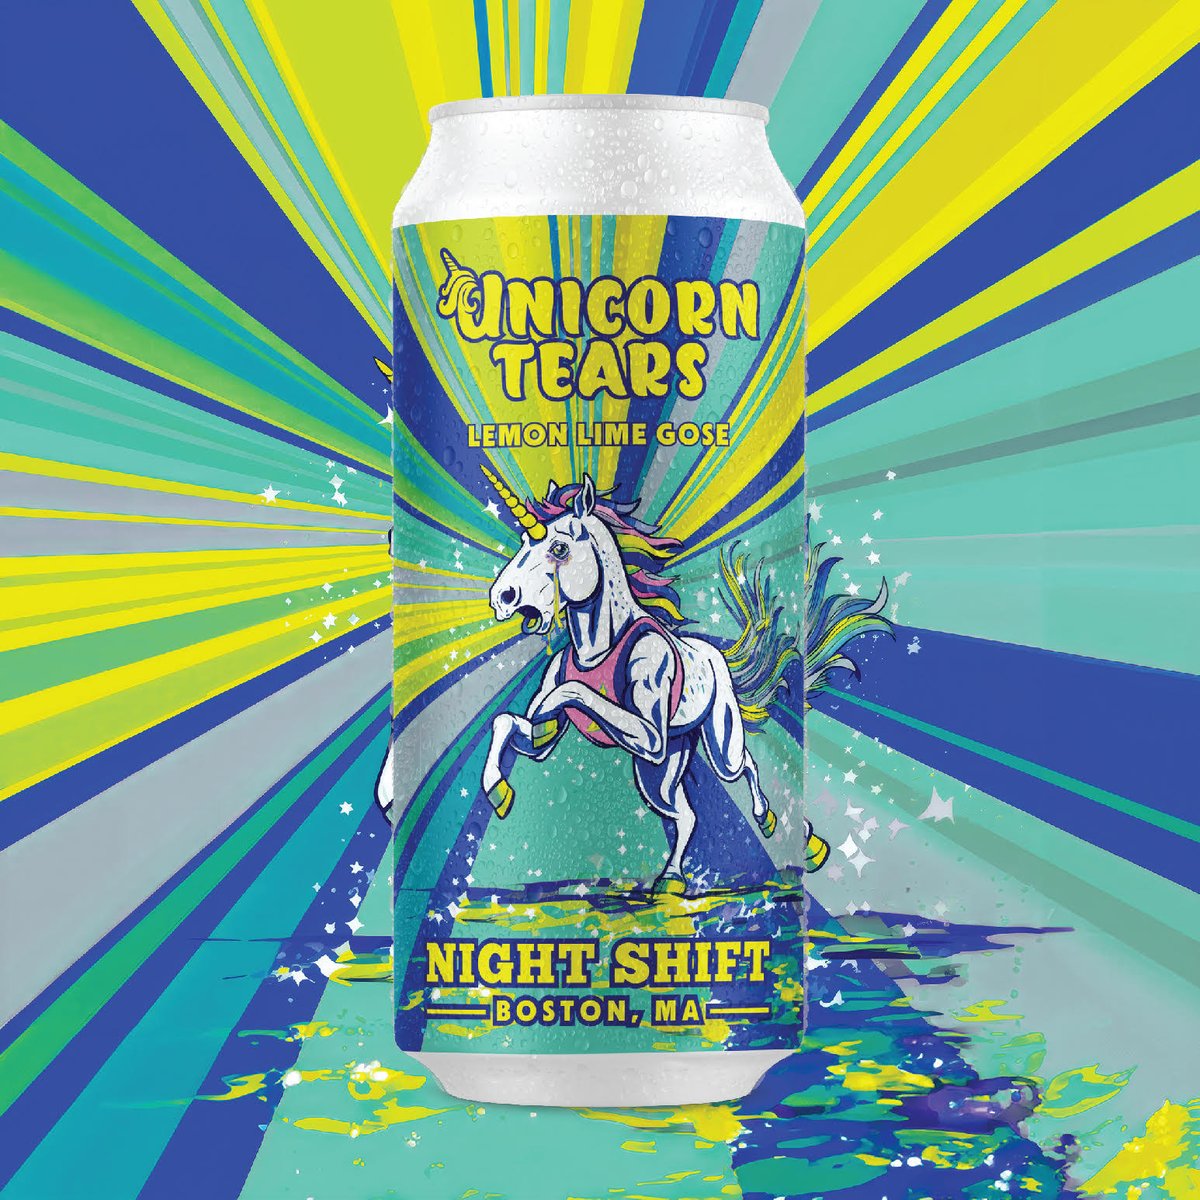 BEER RELEASE NEWS!! @NightShiftBeer Celebrates Boston Marathon With Limited Release of Unicorn Tears, and Complimentary Pizza For Runners Details Here: massbrewbros.com/night-shift-br… #BostonMarathon